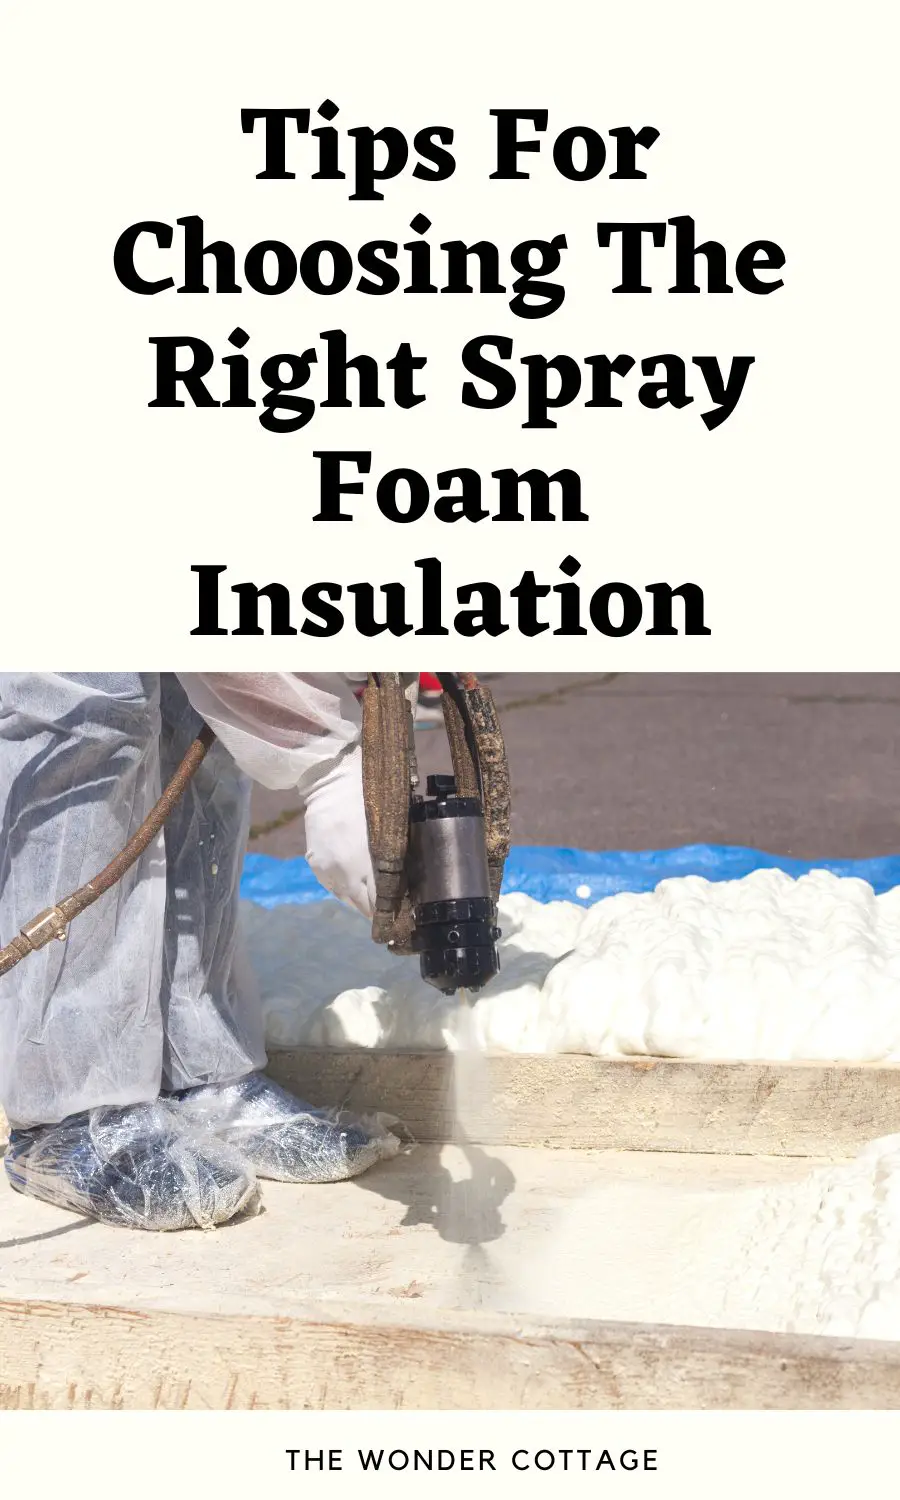 Tips For Choosing The Right Spray Foam Insulation For Your Home